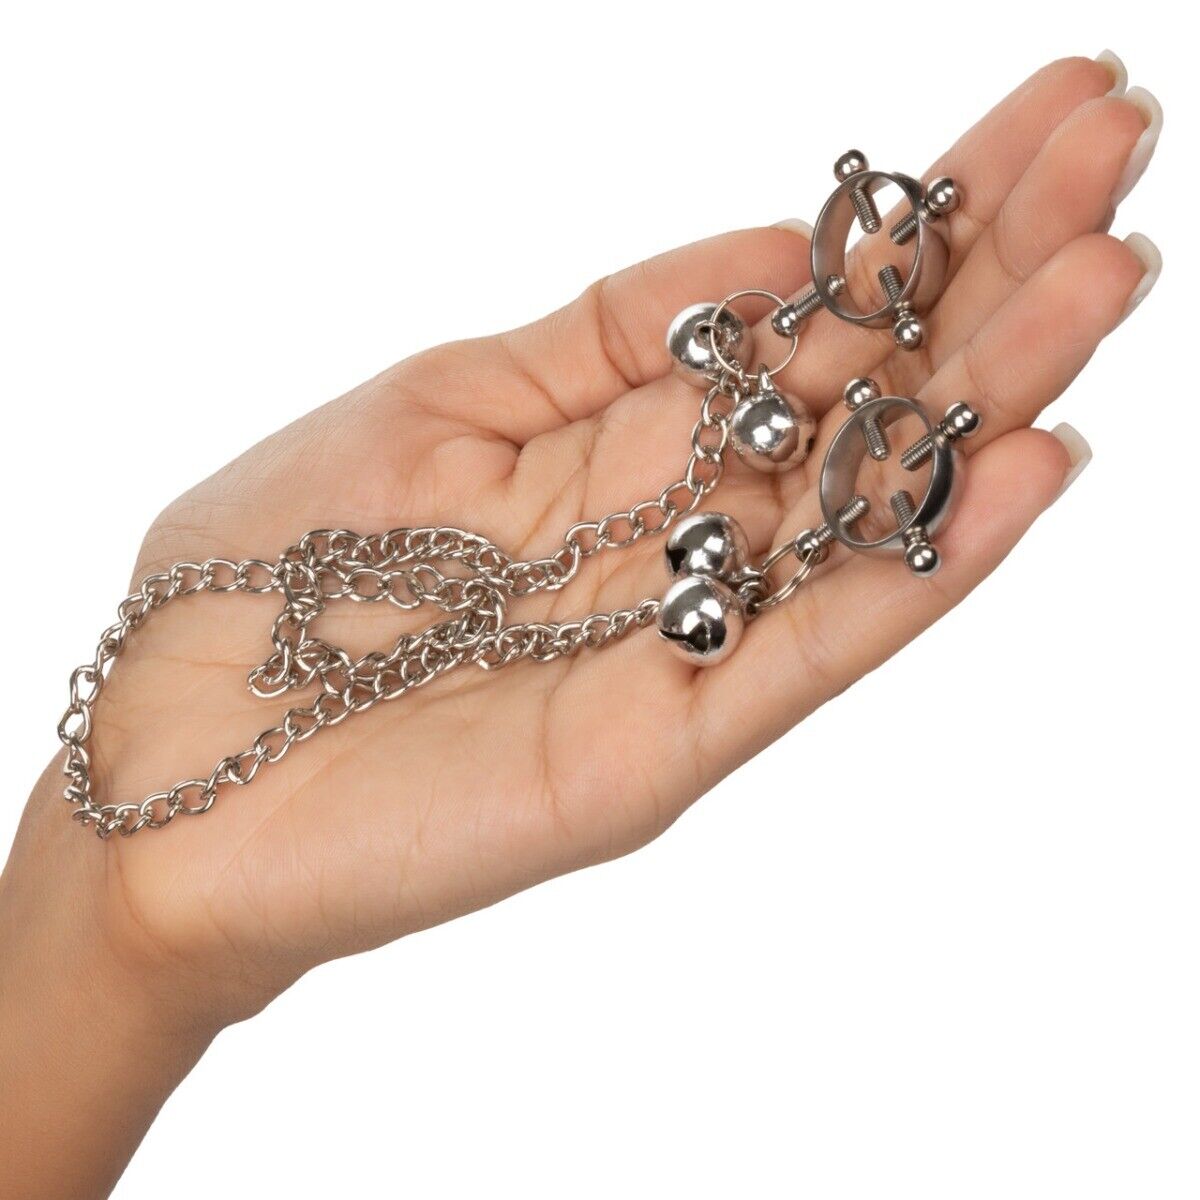 Nipple Grips 4-Point Nipple Press Clamps with Bells SM Bondage Sex Toys